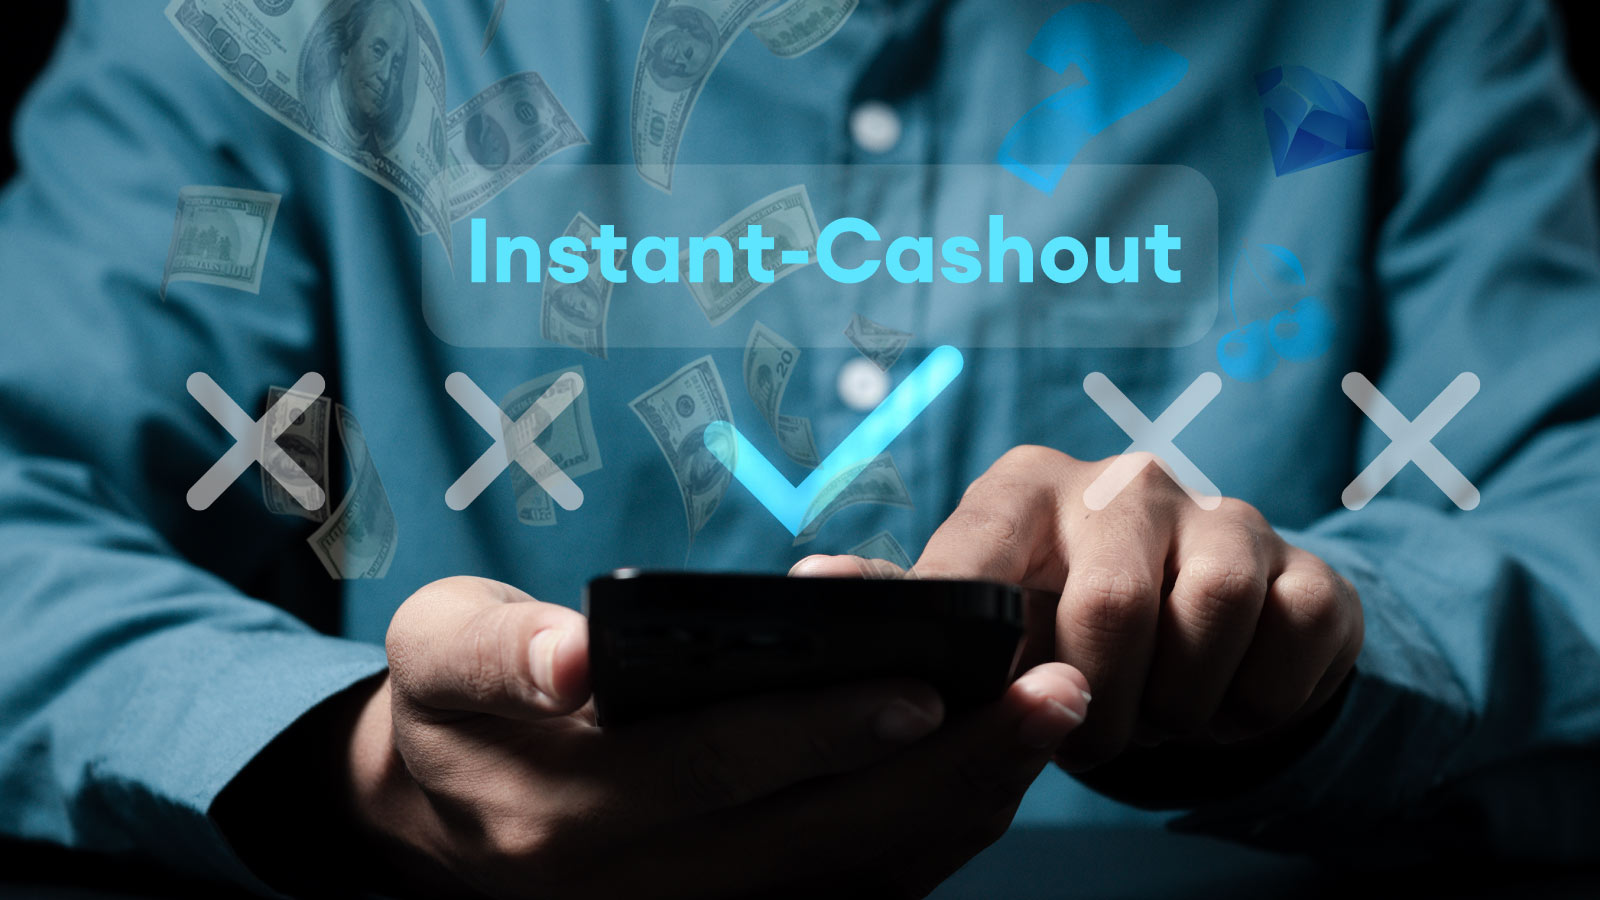 Use Instant-Cashout Payment Methods